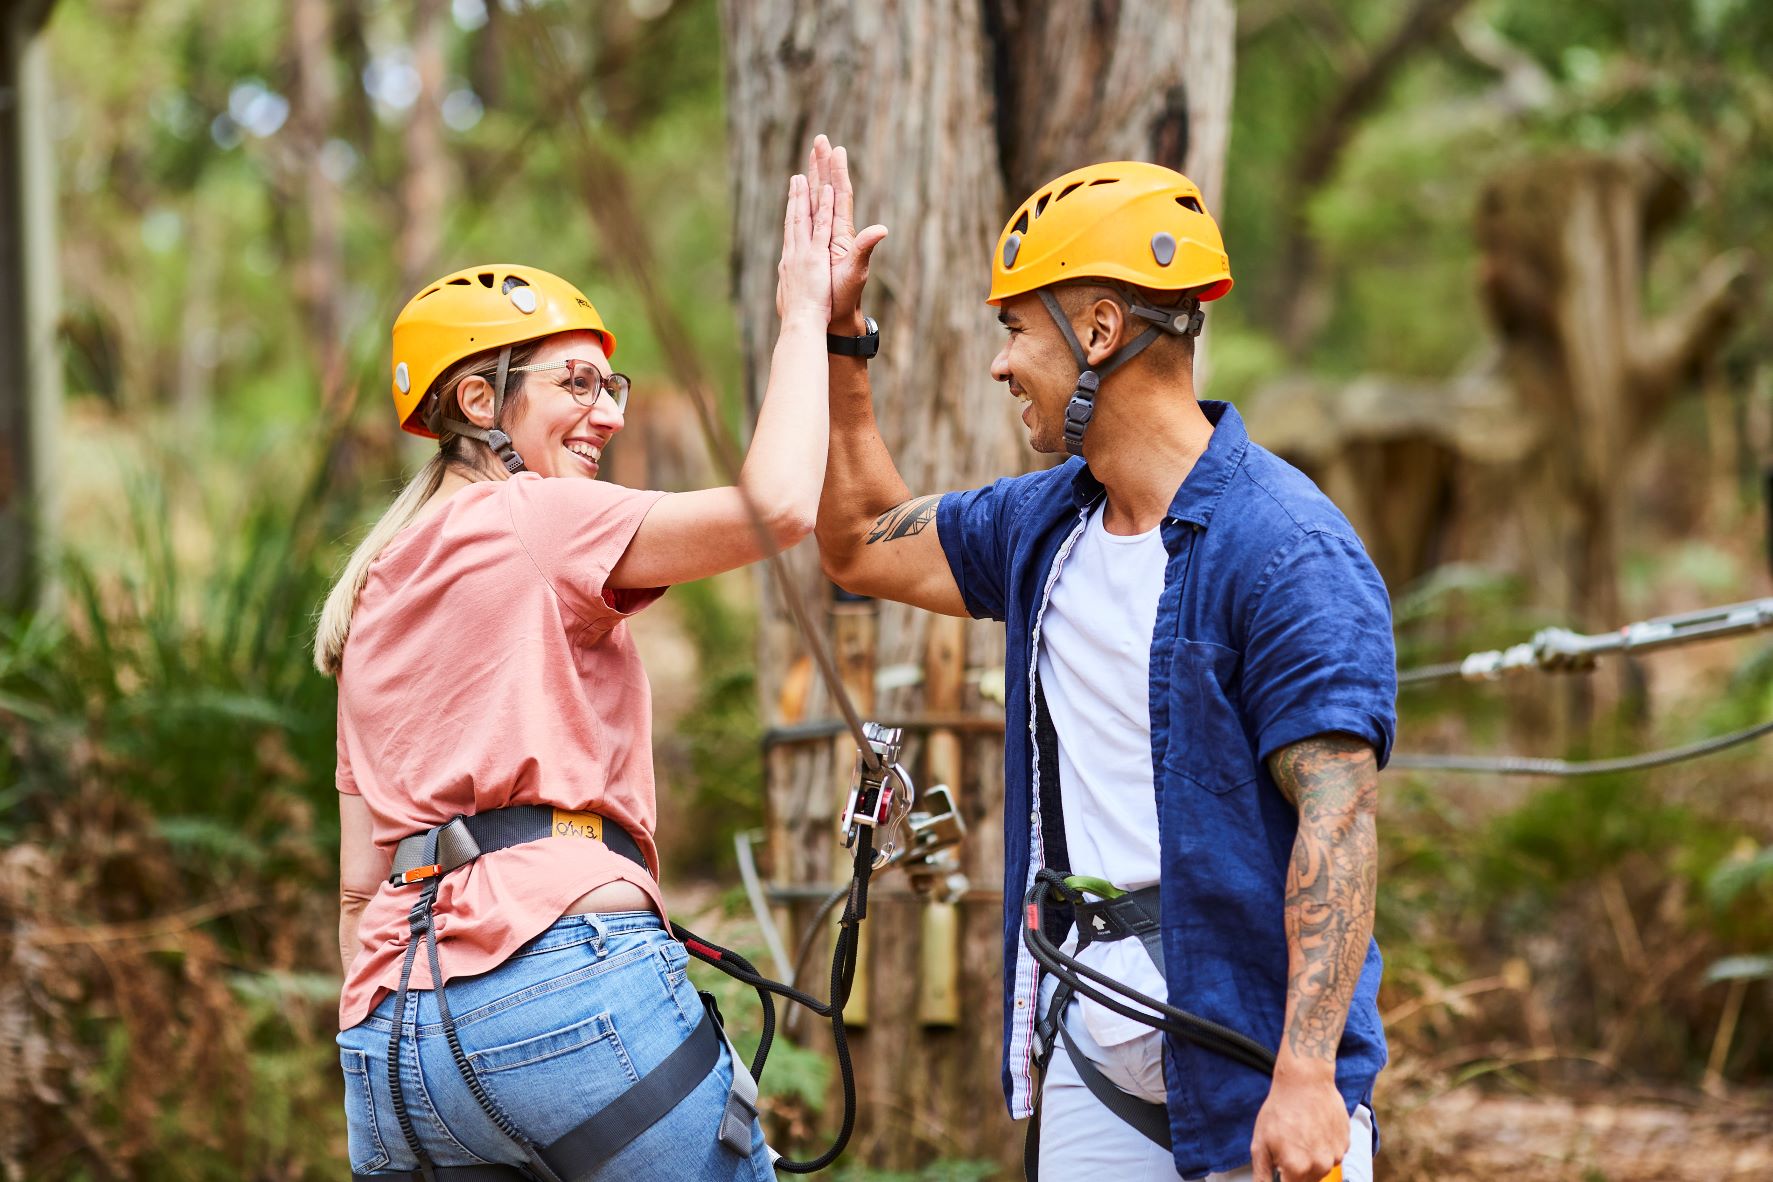 Two adults high fiving after finishing a zipline on the Grand Tree Surfing course